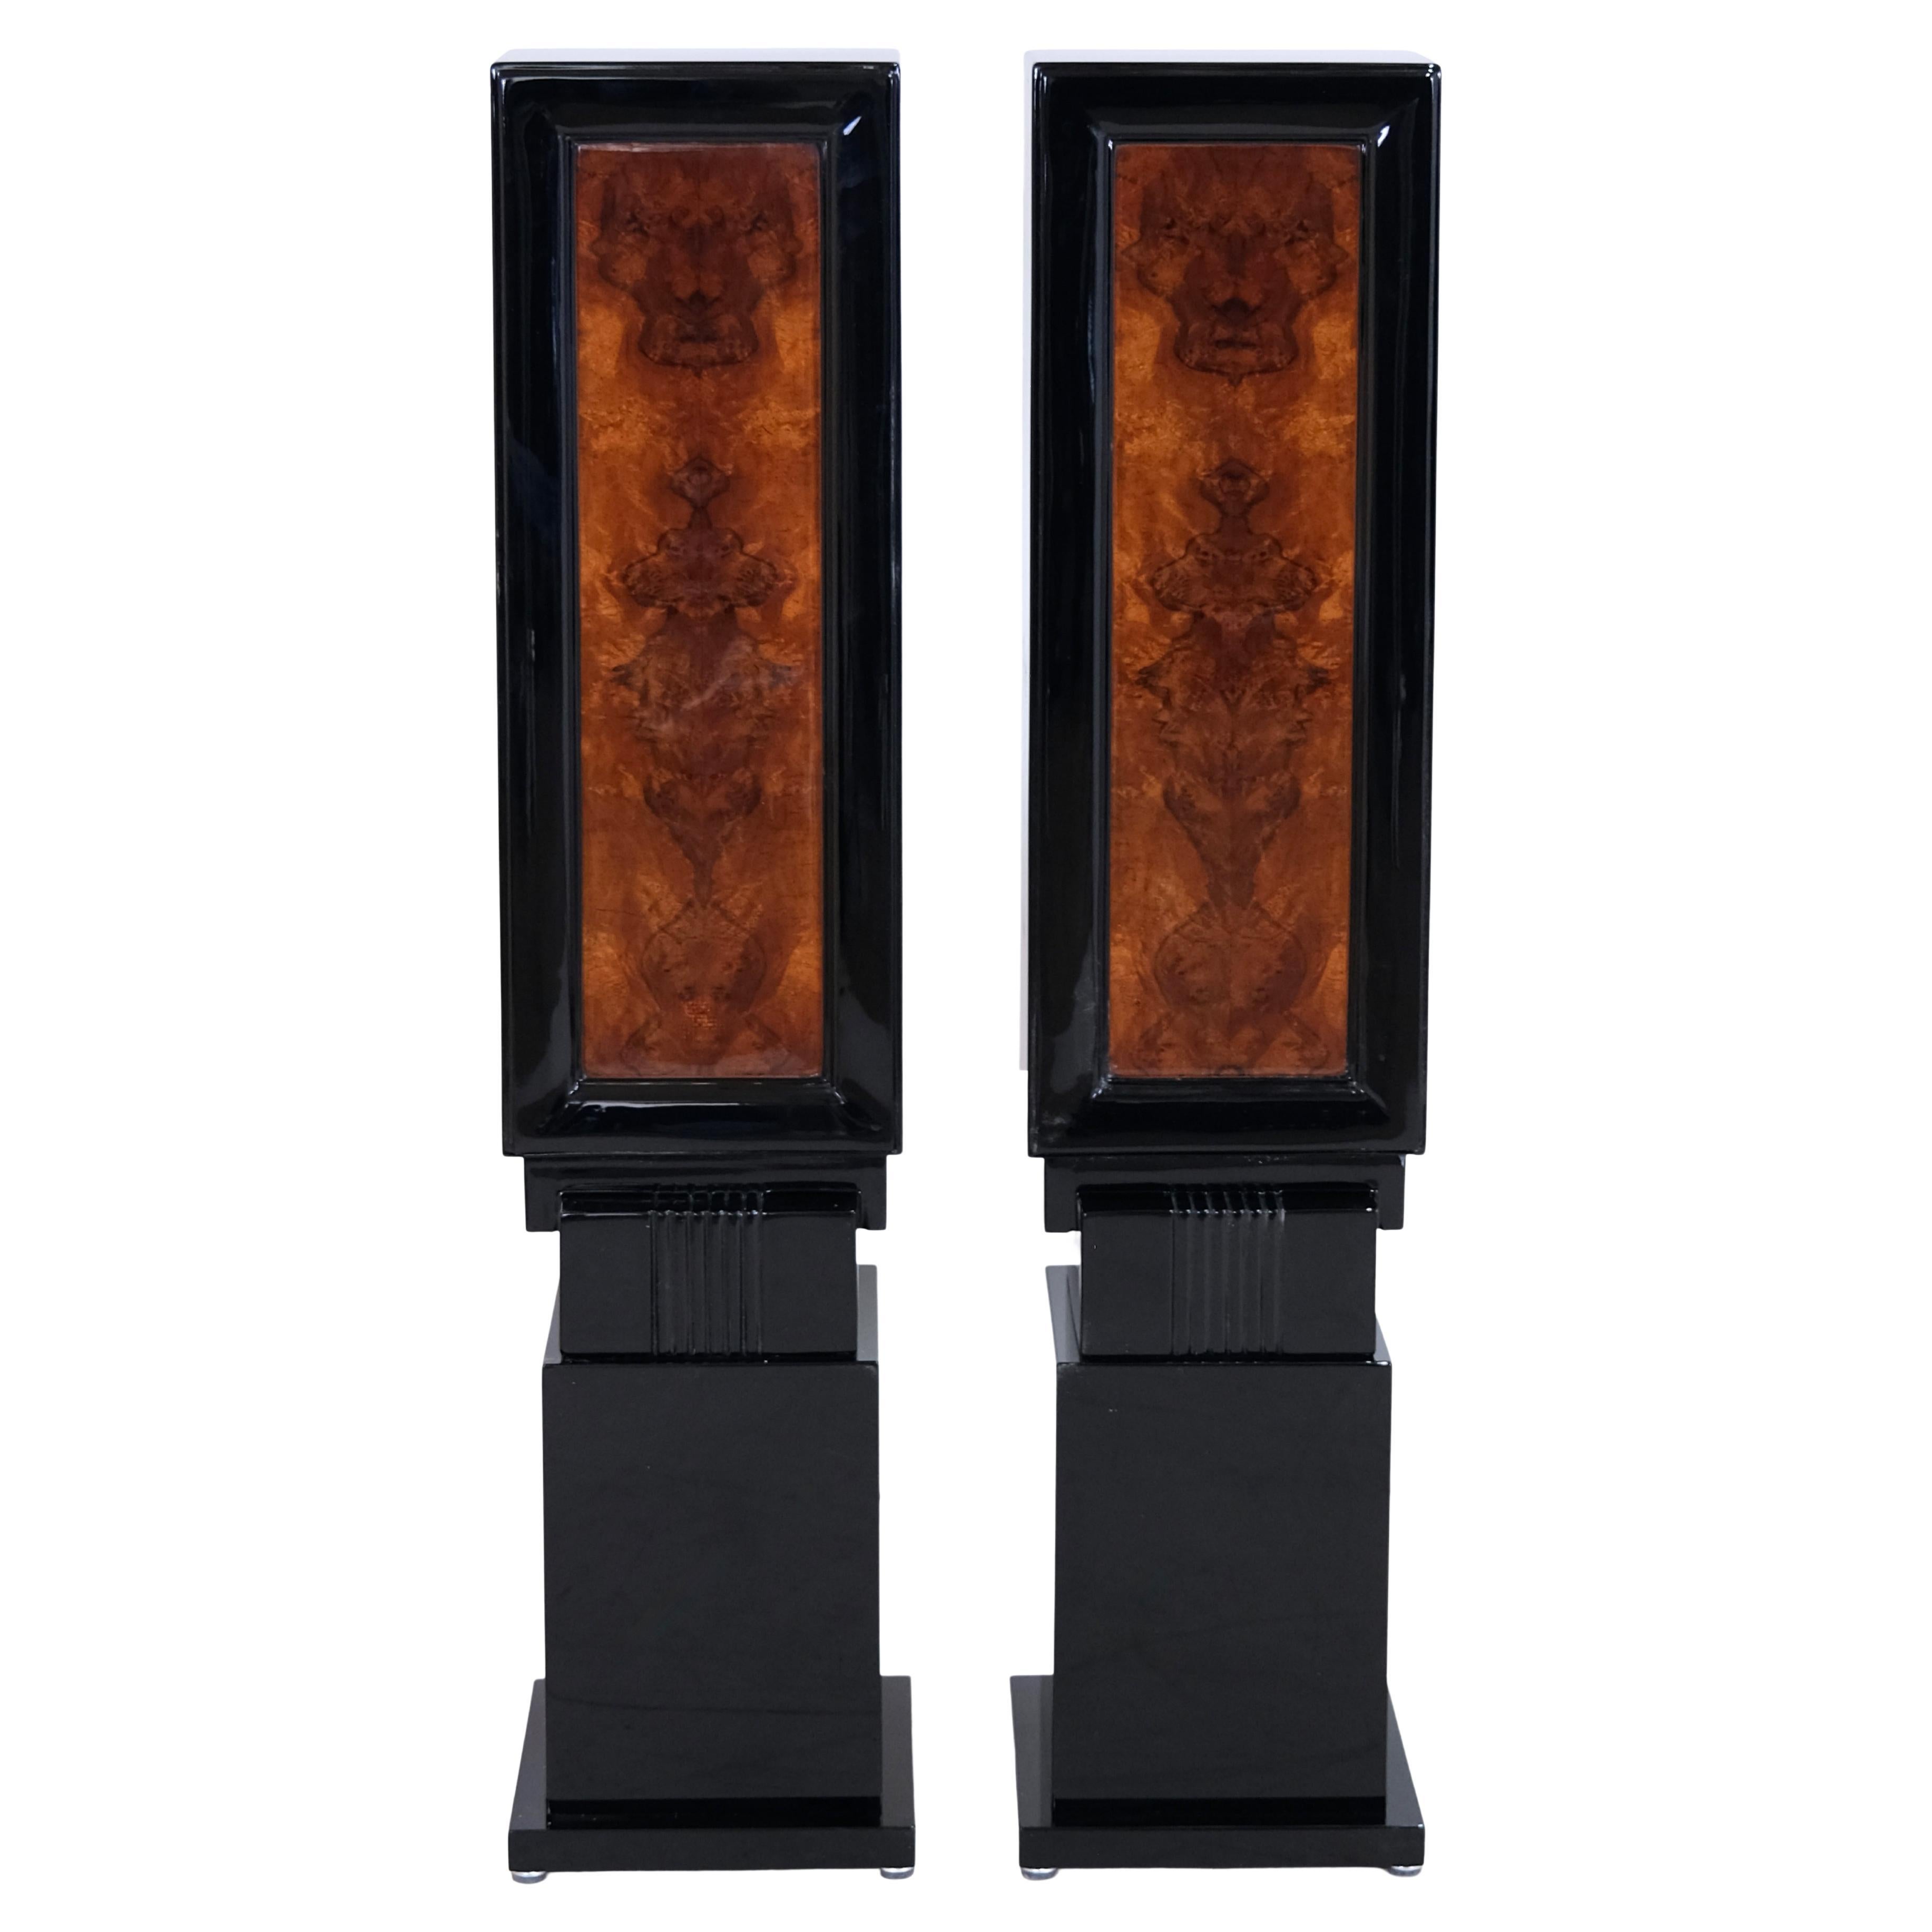 Pair of 1930s French Art Deco Columns in Nutwood and Black Lacquer